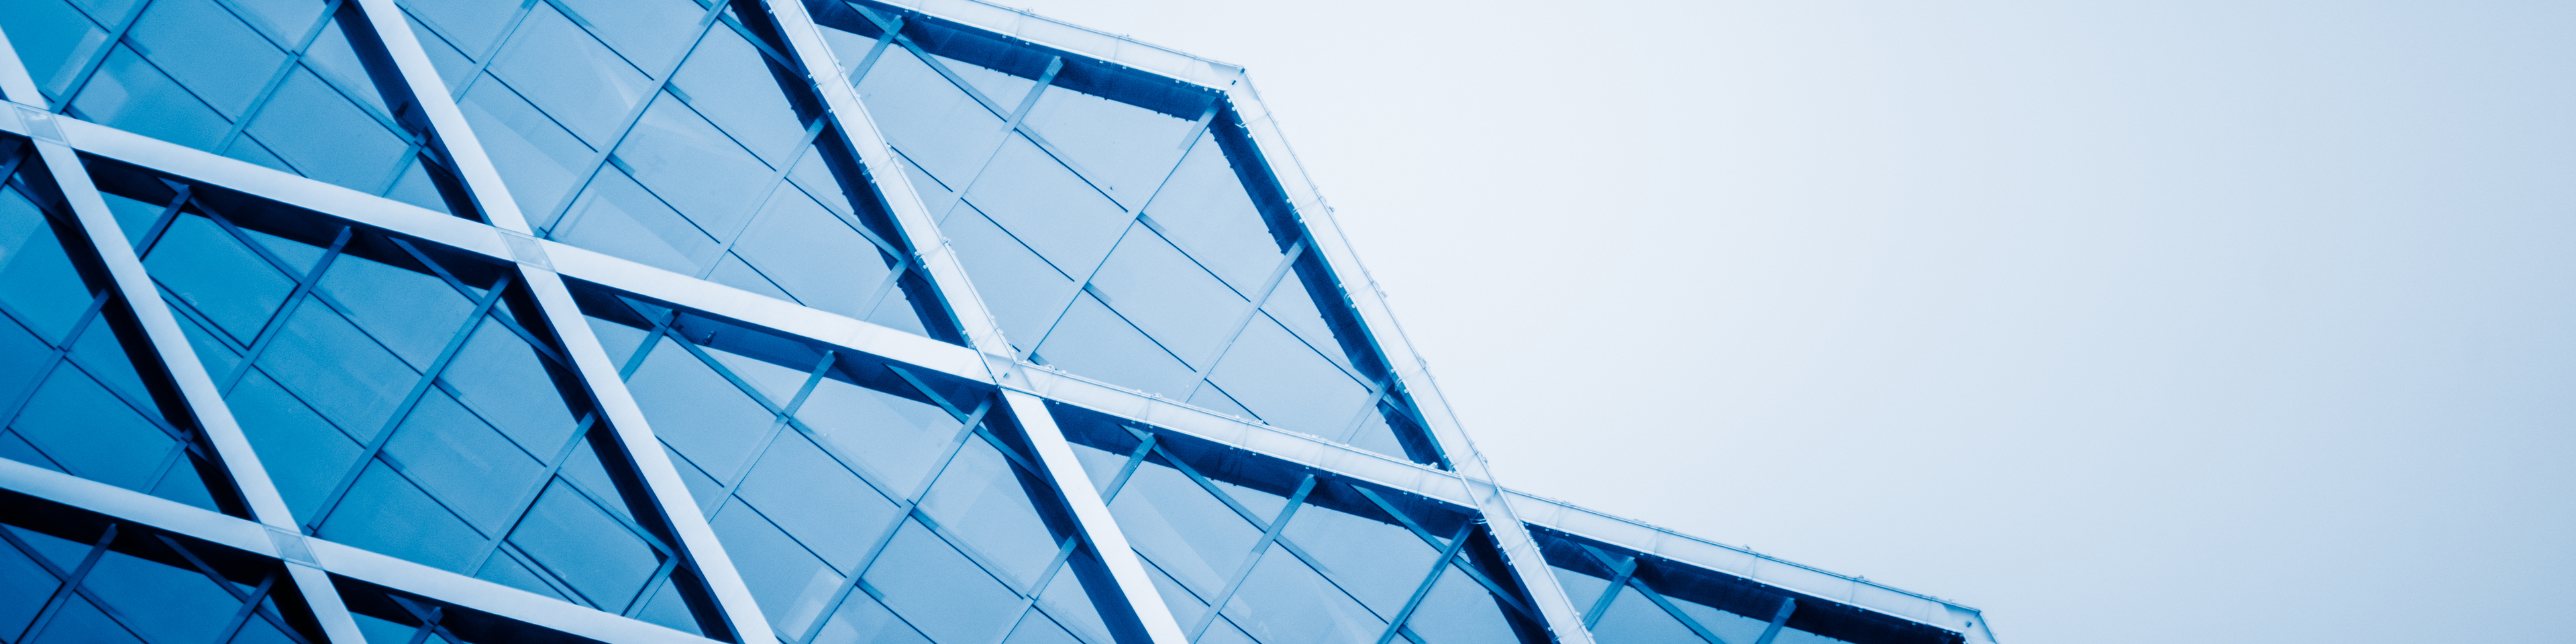 detail of modern glass building, blue toned.